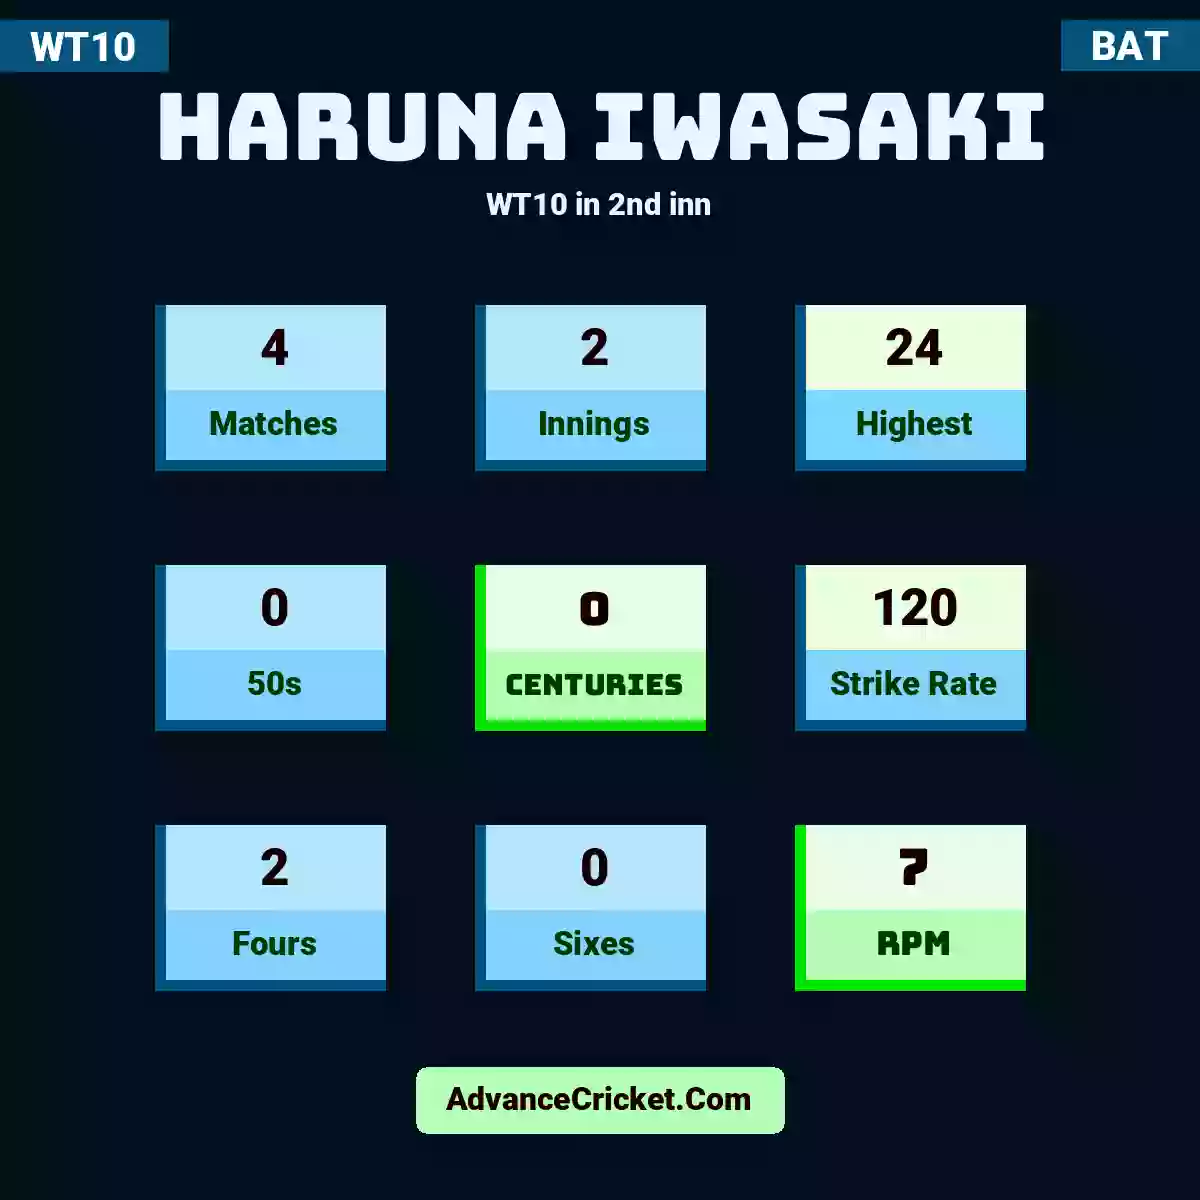 Haruna Iwasaki WT10  in 2nd inn, Haruna Iwasaki played 4 matches, scored 24 runs as highest, 0 half-centuries, and 0 centuries, with a strike rate of 120. H.Iwasaki hit 2 fours and 0 sixes, with an RPM of 7.